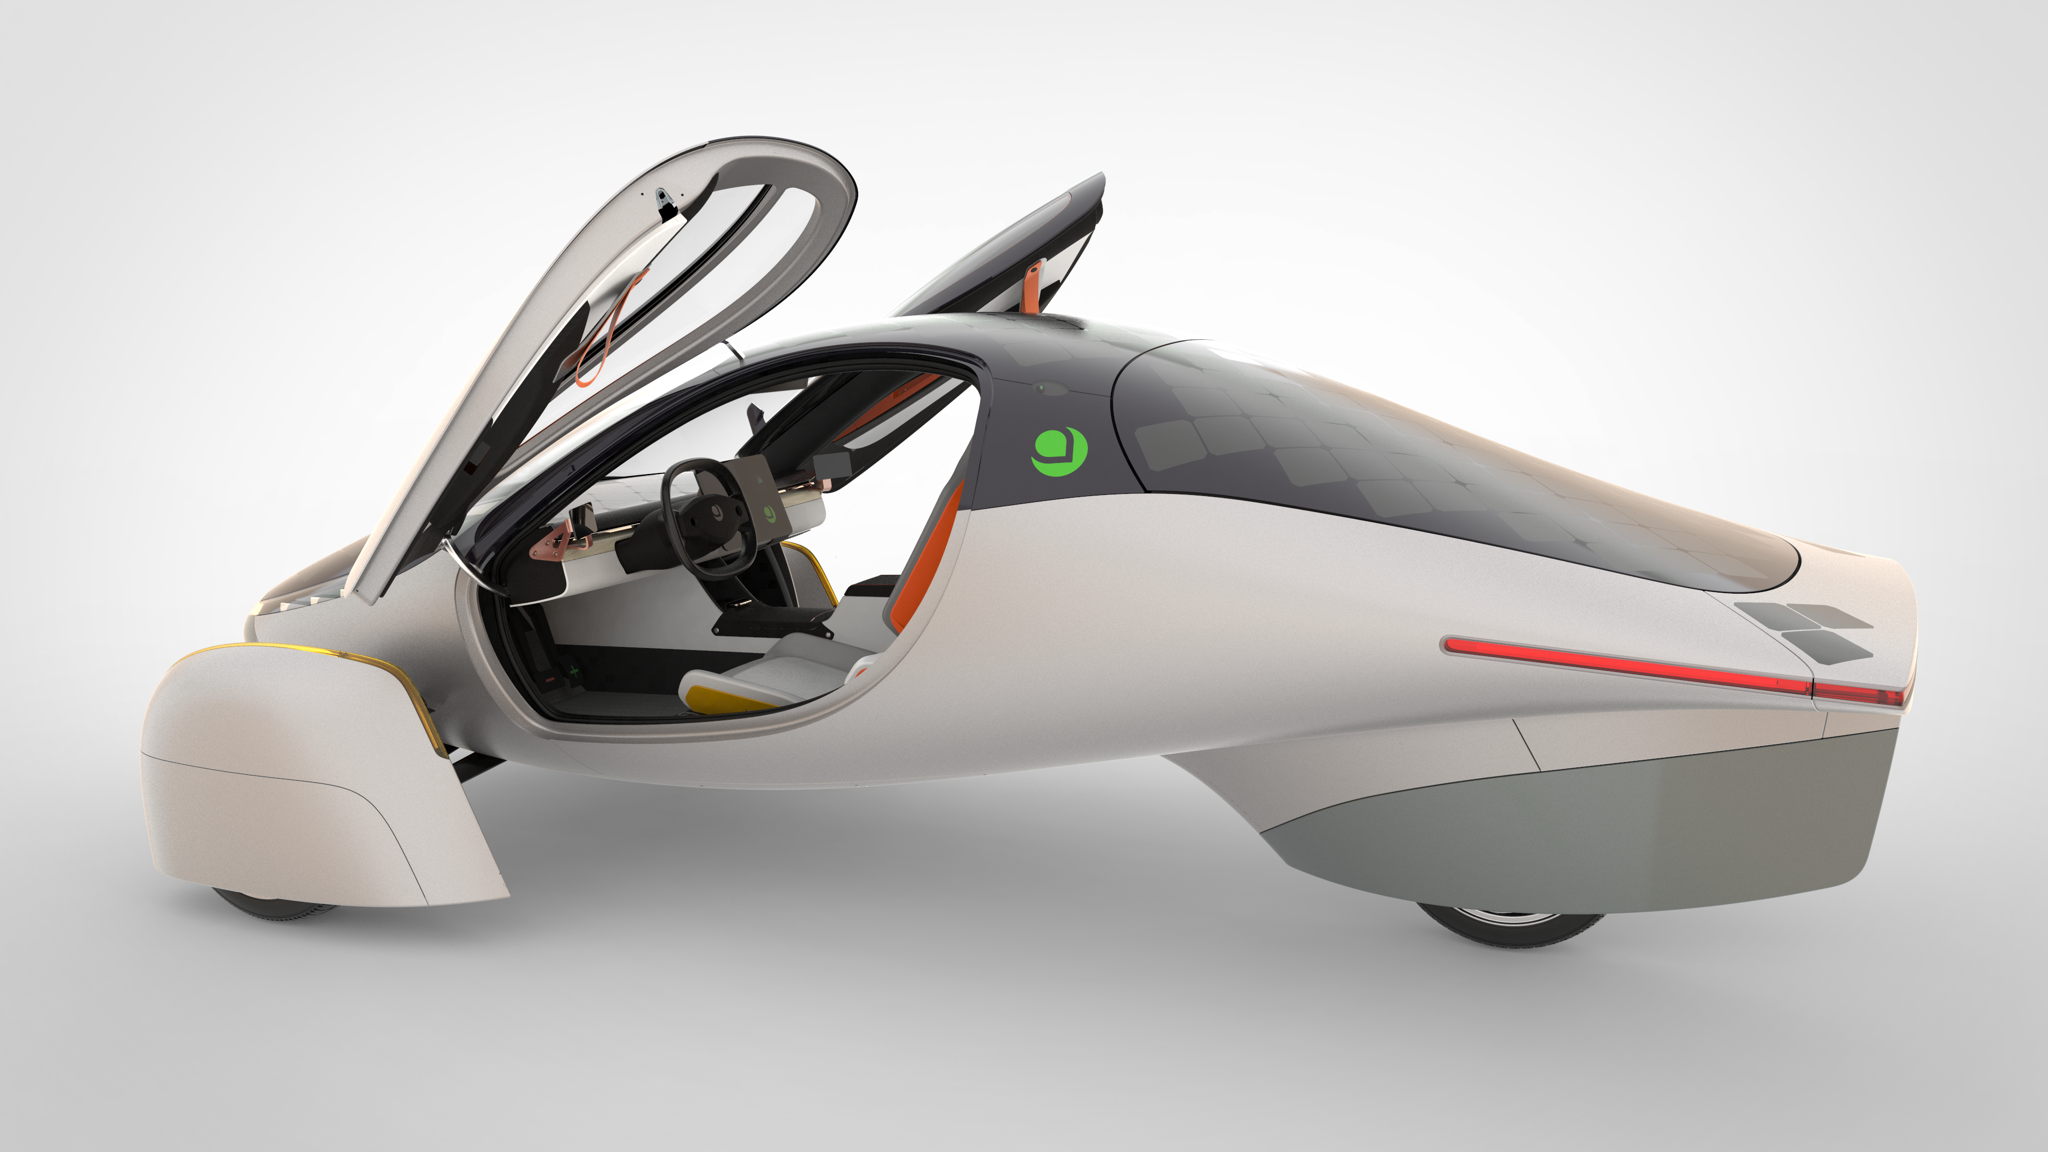 Aptera is a solar electric autocycle